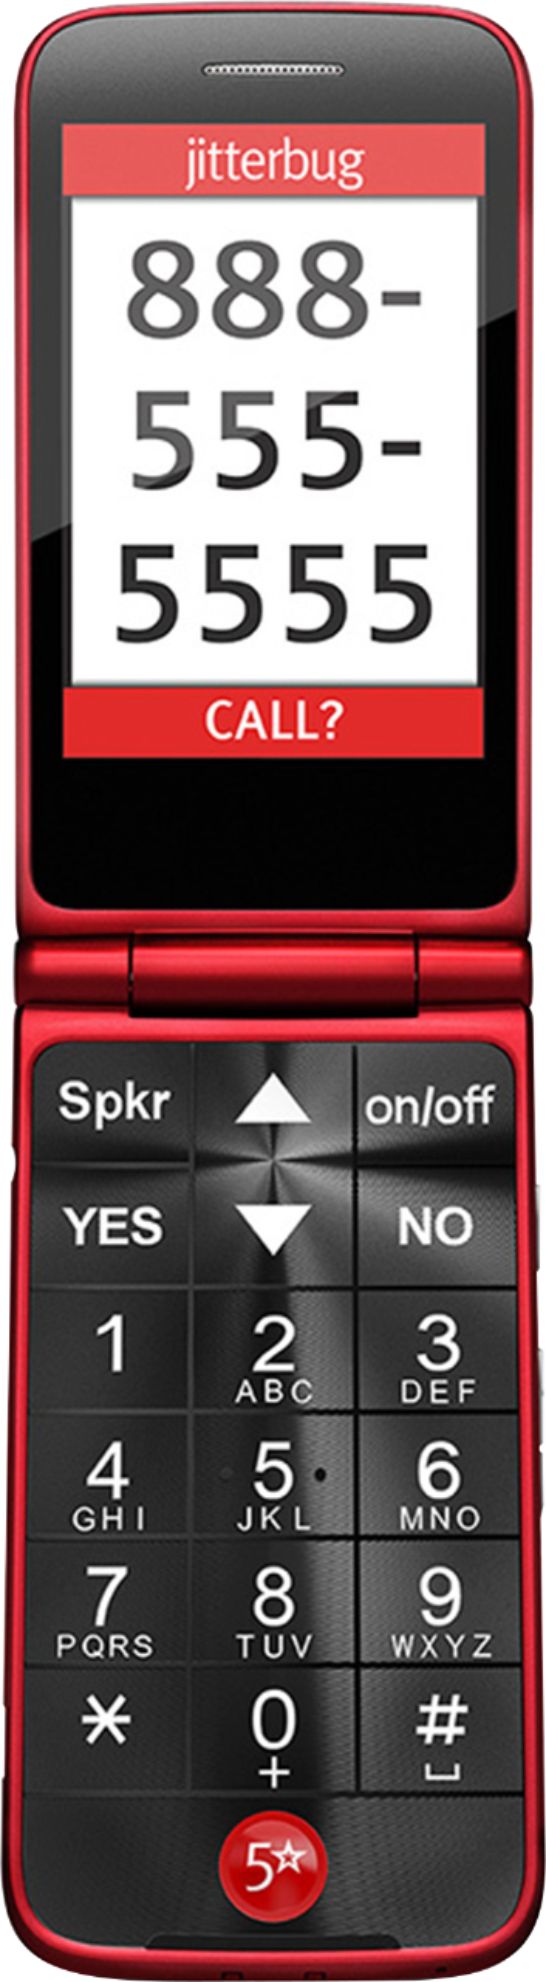 GreatCall - Flip Prepaid Cell Phone for Seniors - Red